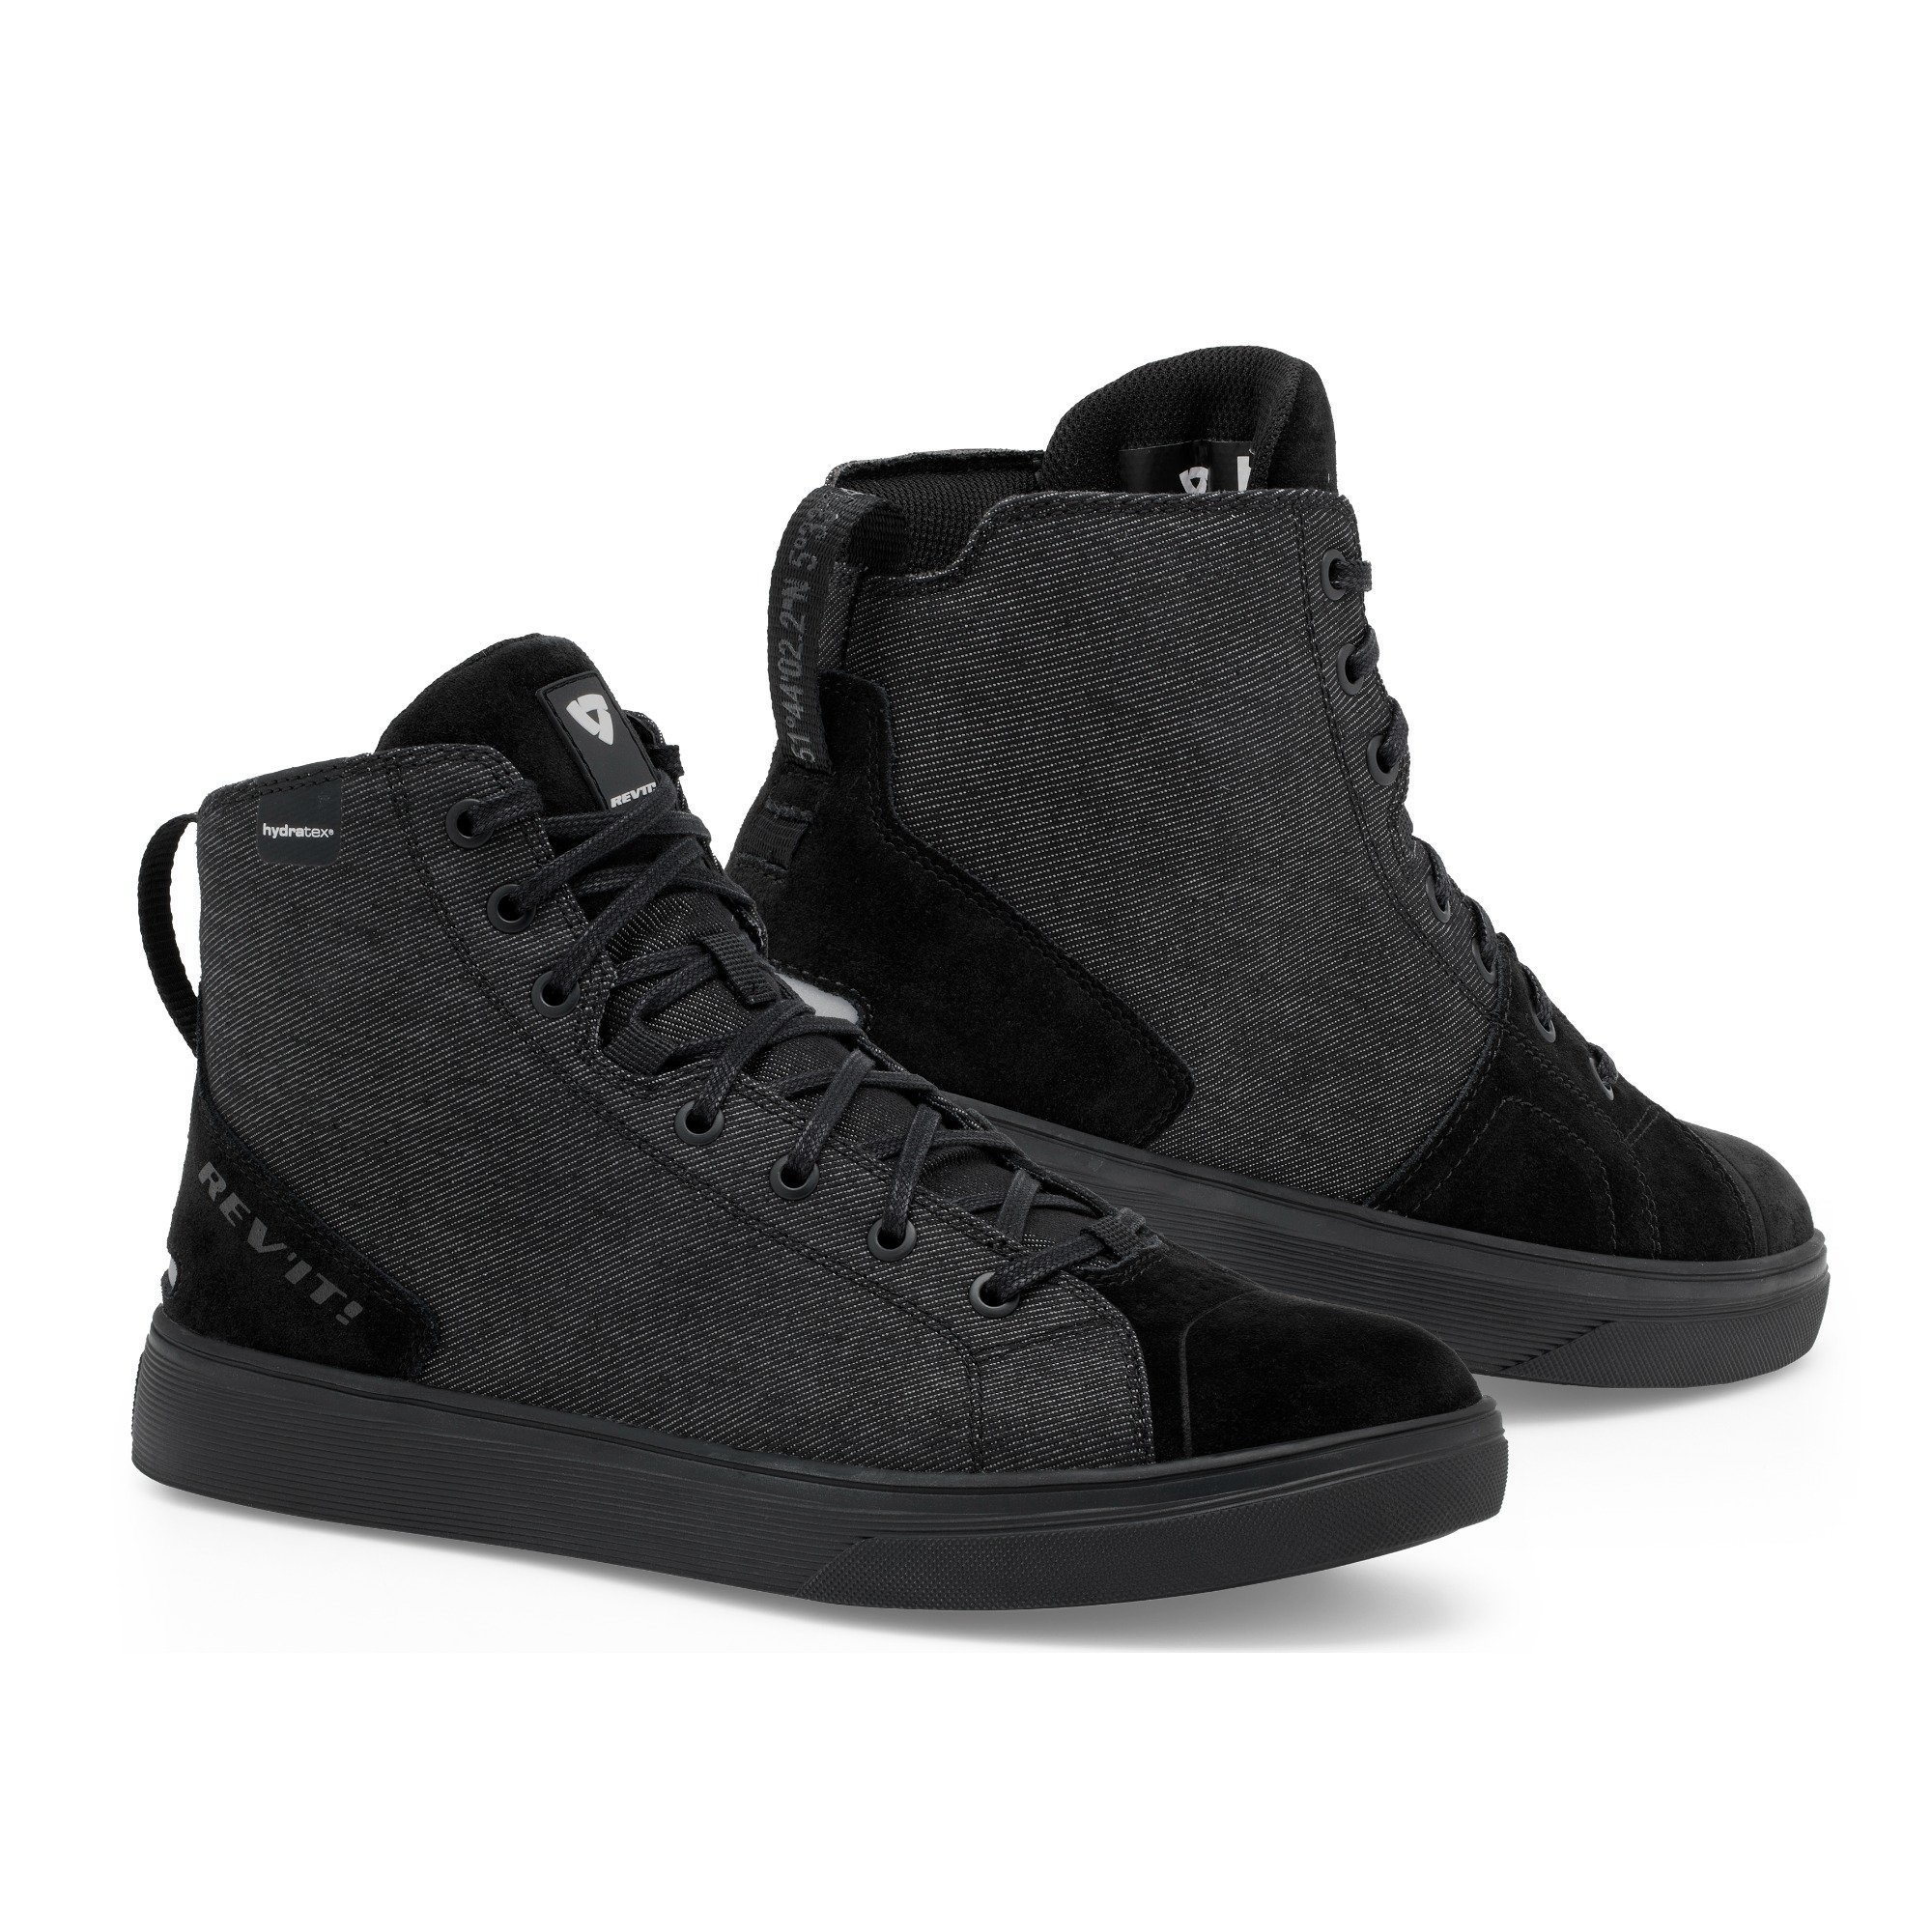 Image of REV'IT! Delta H2O Shoes Black Size 47 ID 8700001356411